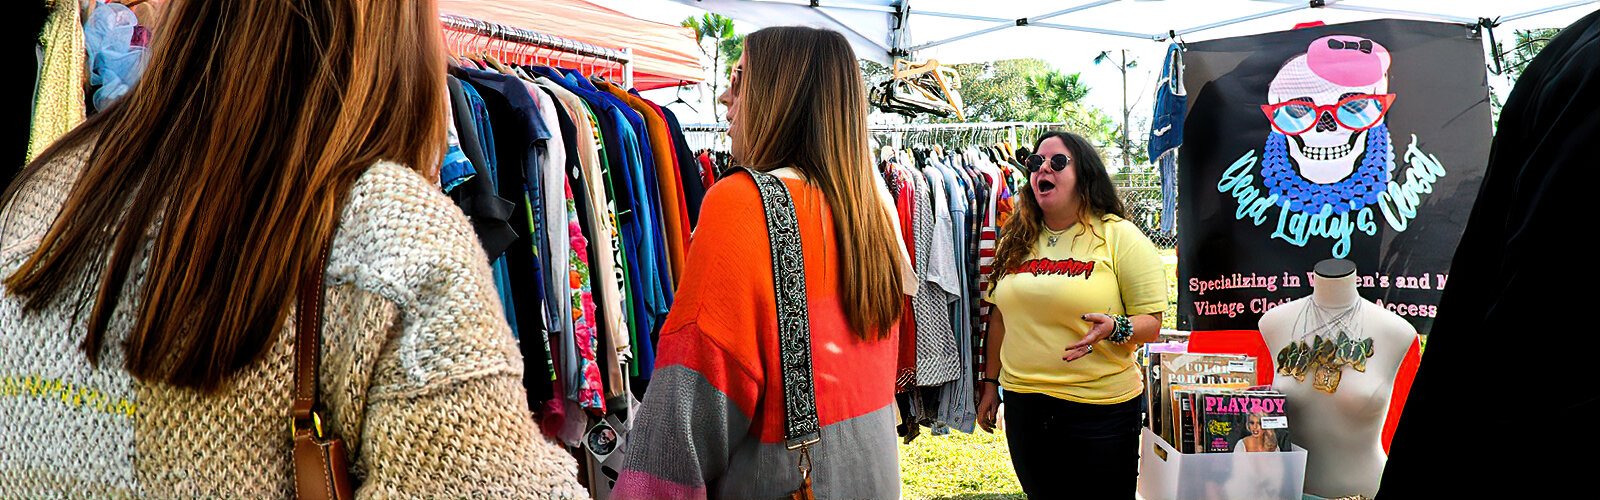  At the Indie Flea St. Pete, Heather encourages patrons at her Dead Lady’s Closet to go through an array of exciting secondhand vintage clothes for men and women.